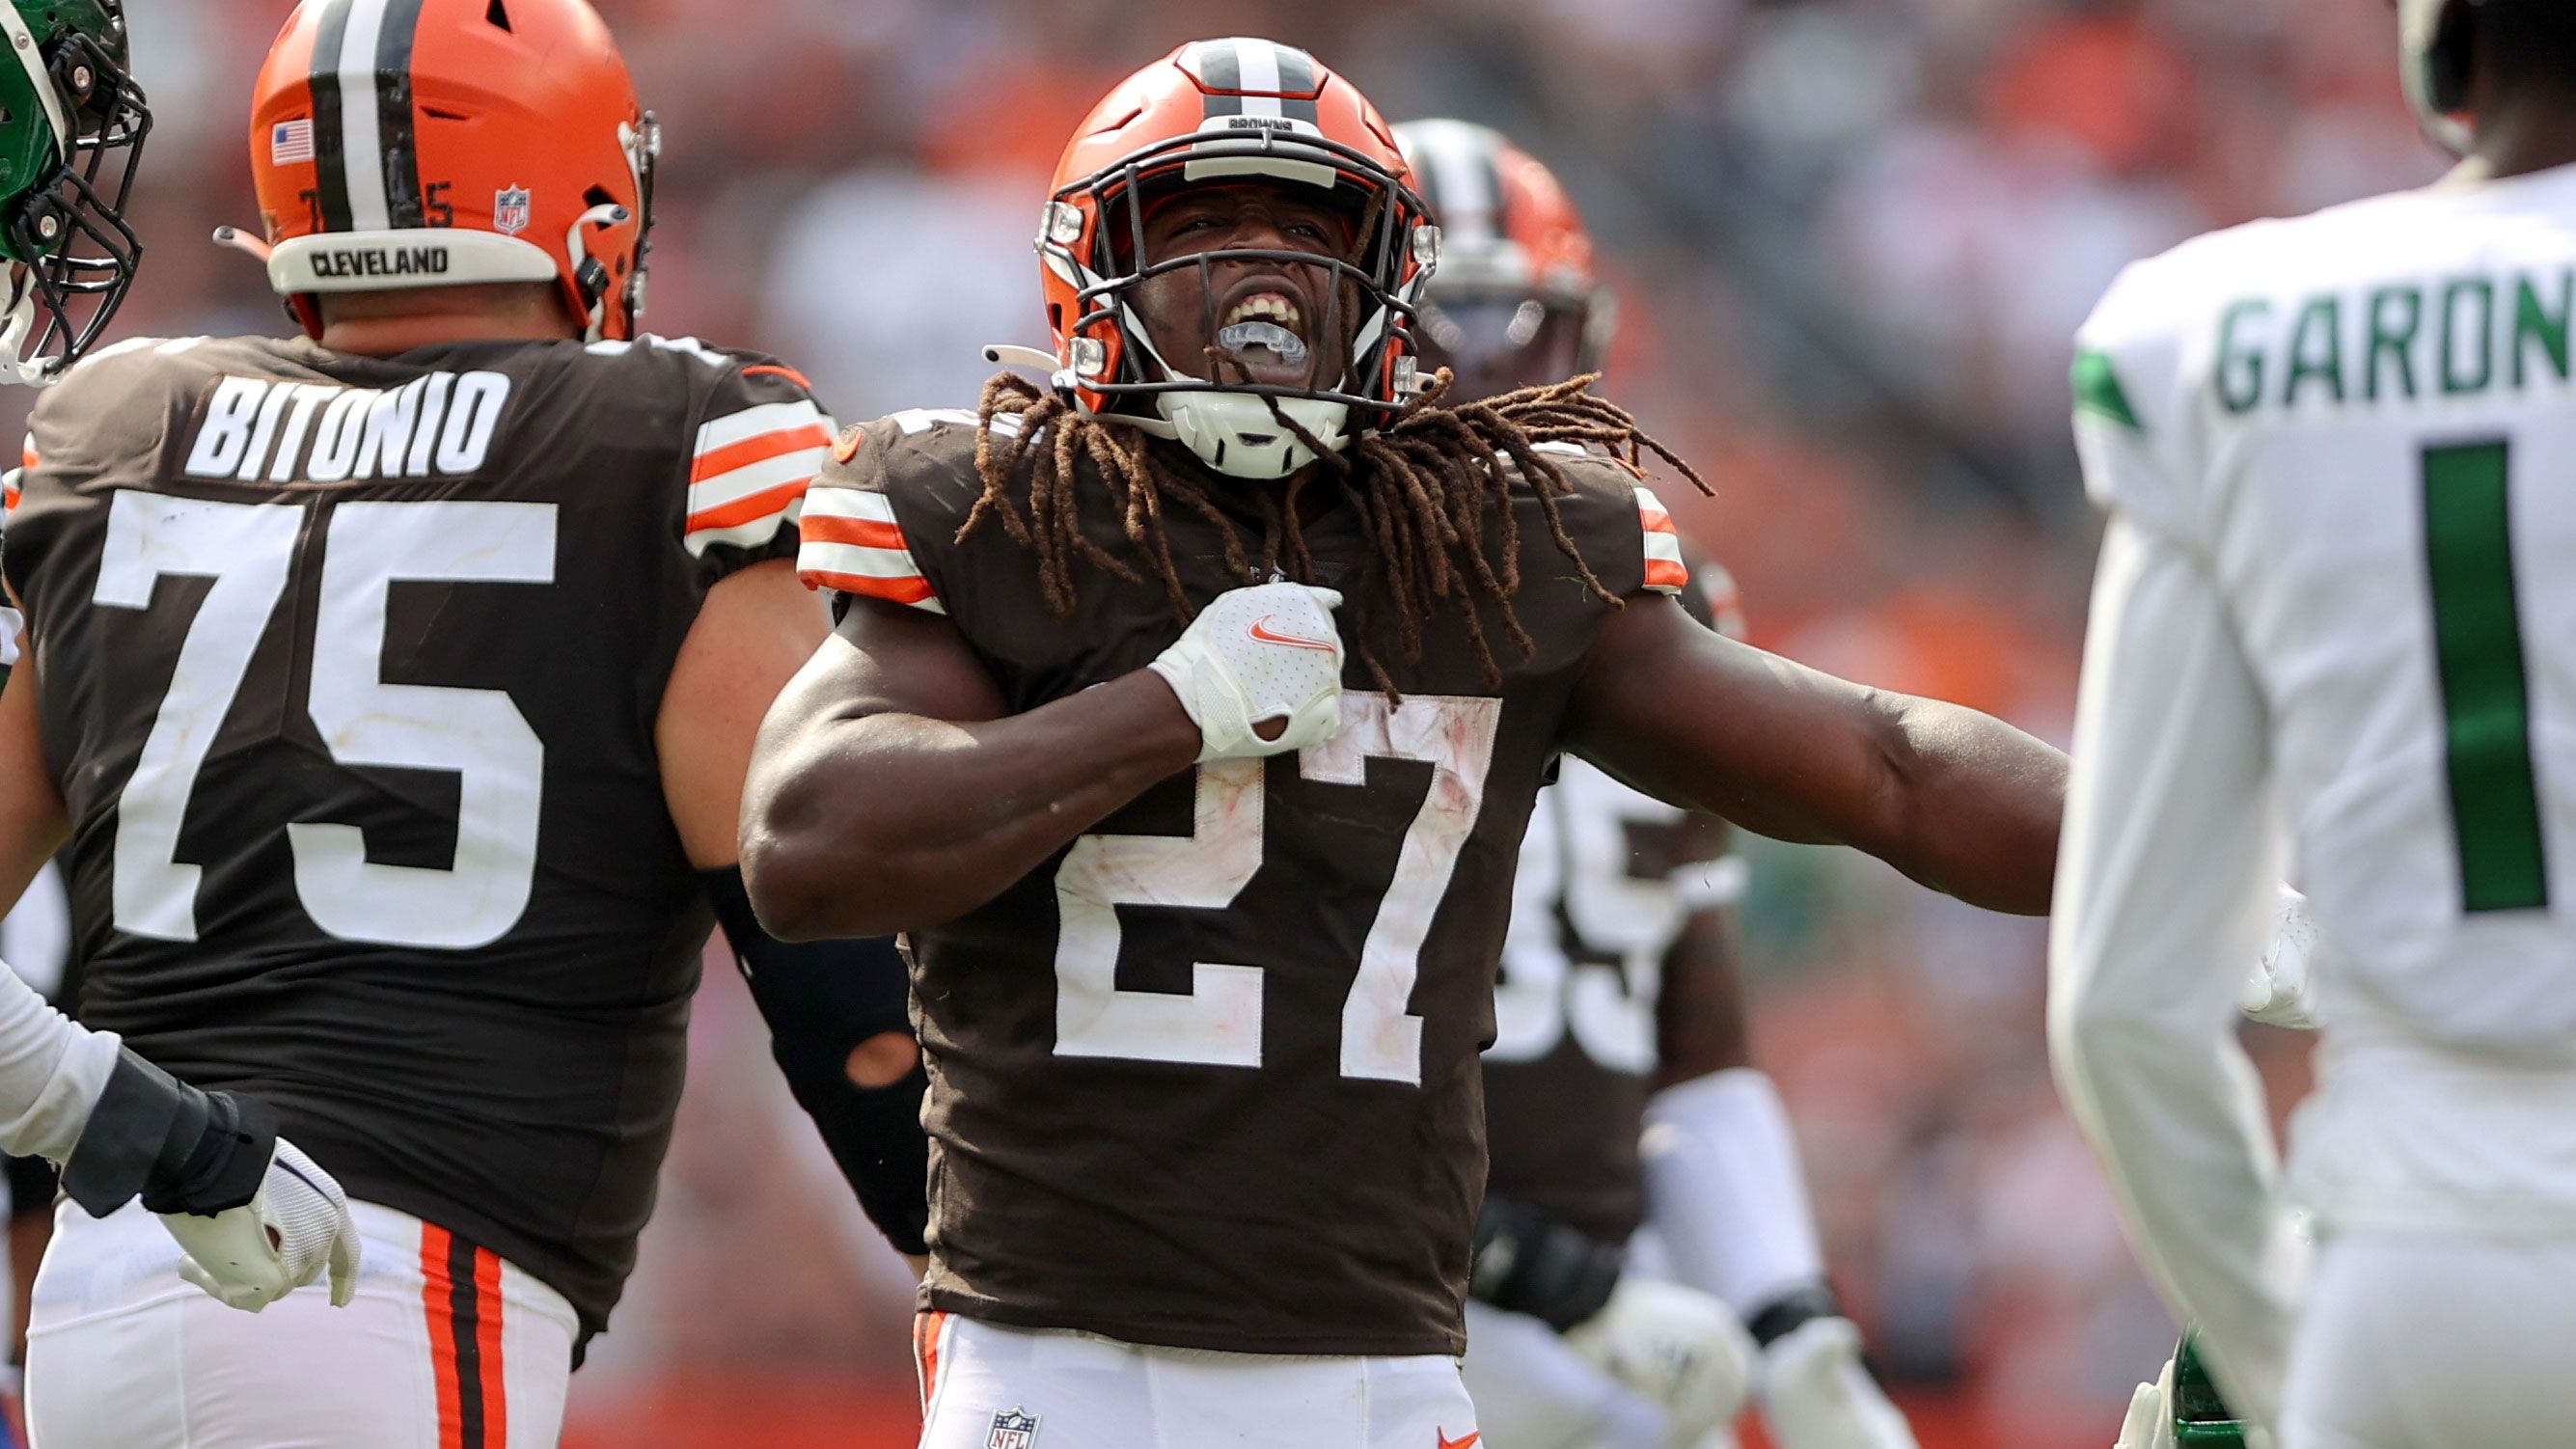 Cleveland Browns running back Kareem Hunt (27) celebrates after running for a first down during the fourth quarter against the New York Jets. 